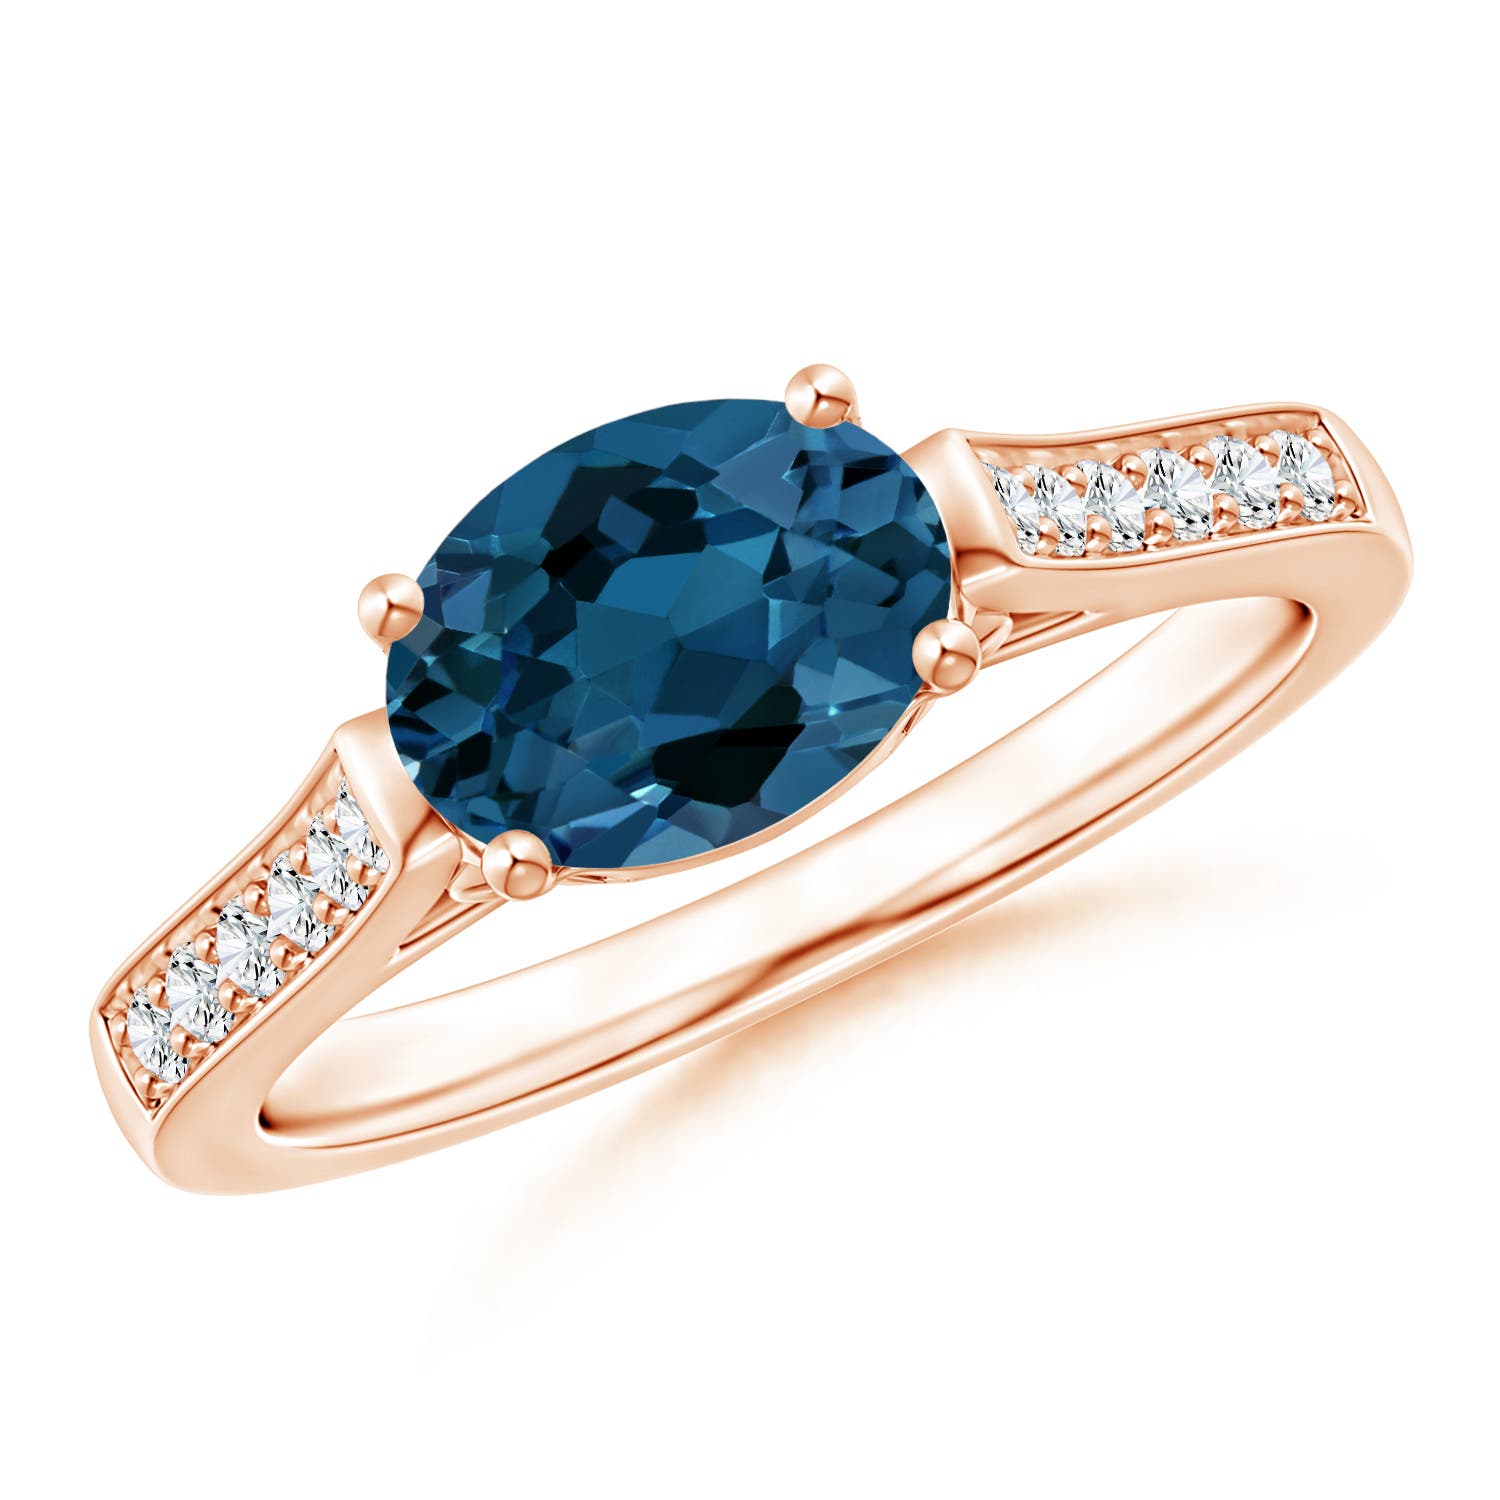 East-West Oval London Blue Topaz Solitaire Ring with Diamonds | Angara